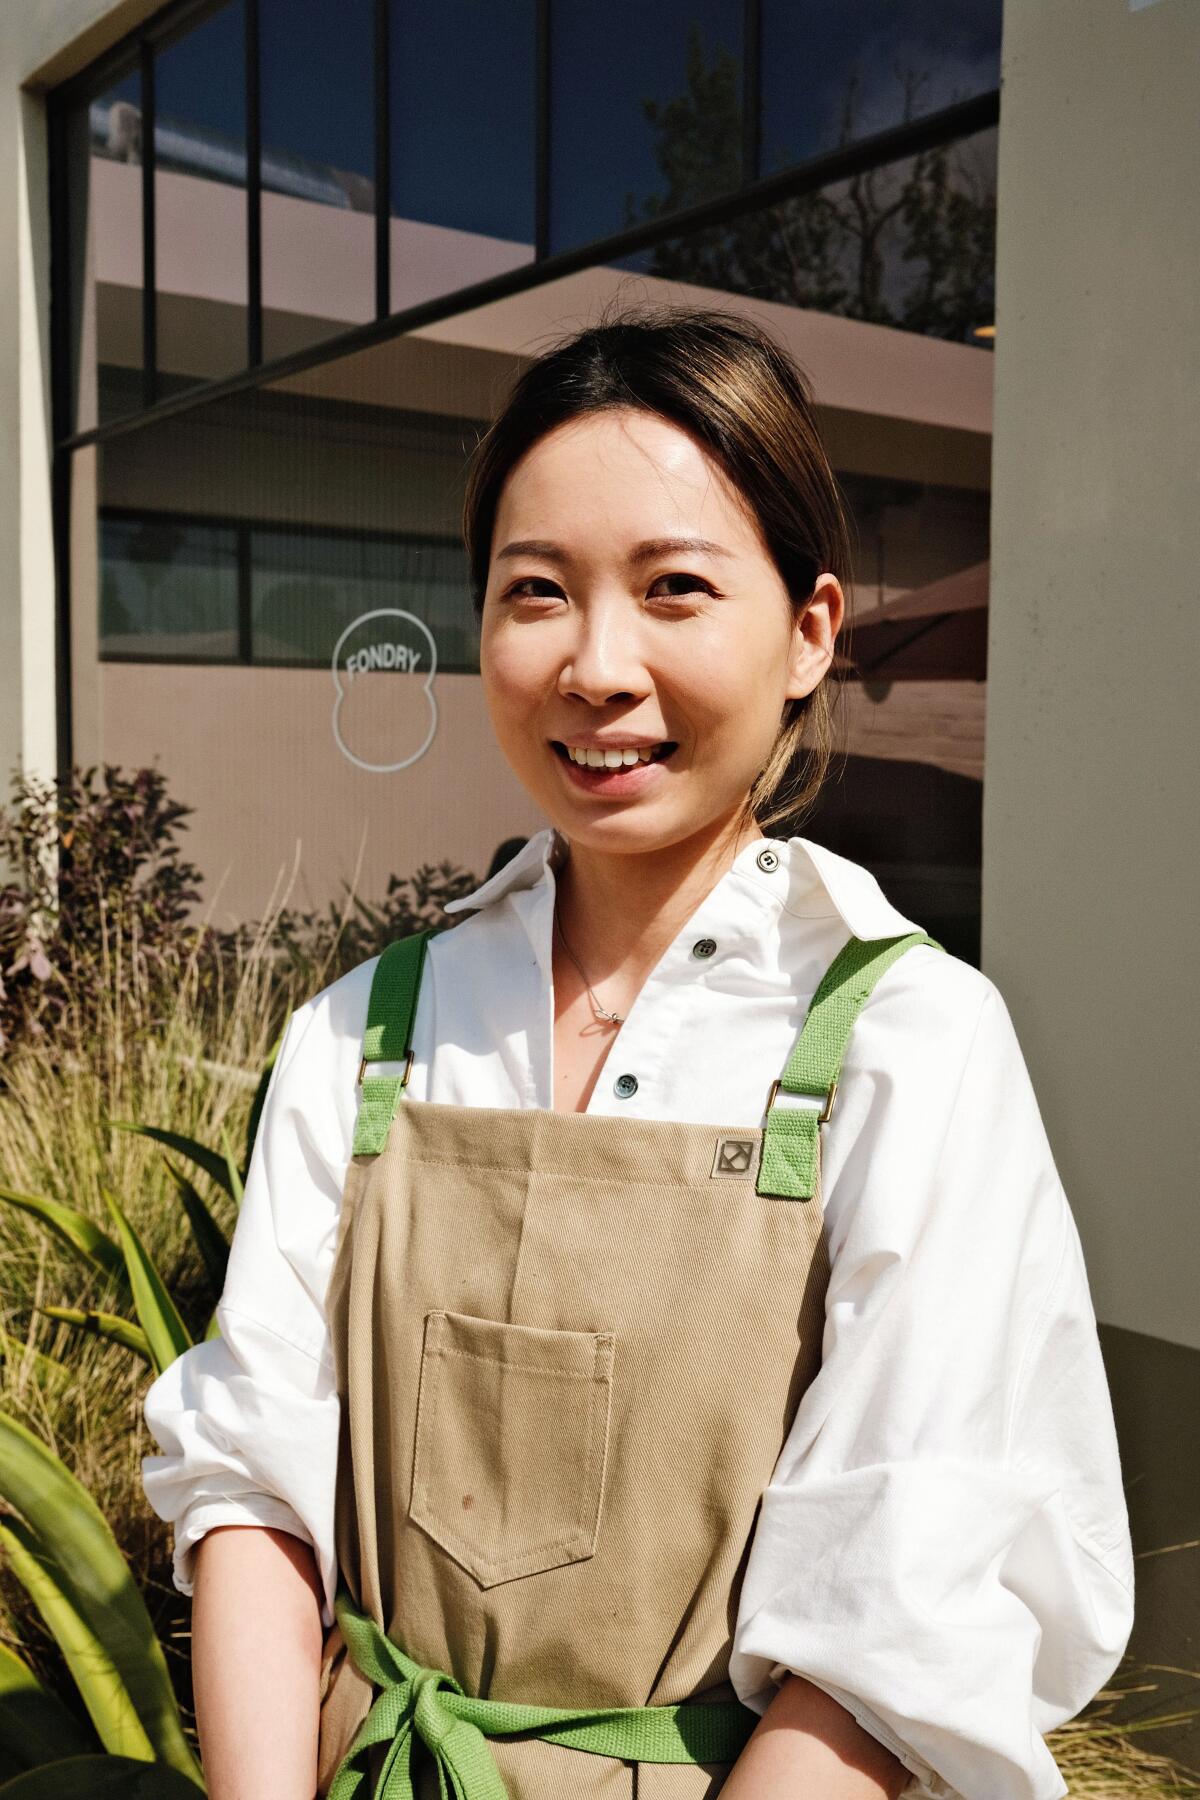 A portrait of Ivy Ku wearing an apron and standing in front of her Eagle Rock bakery, Fondry